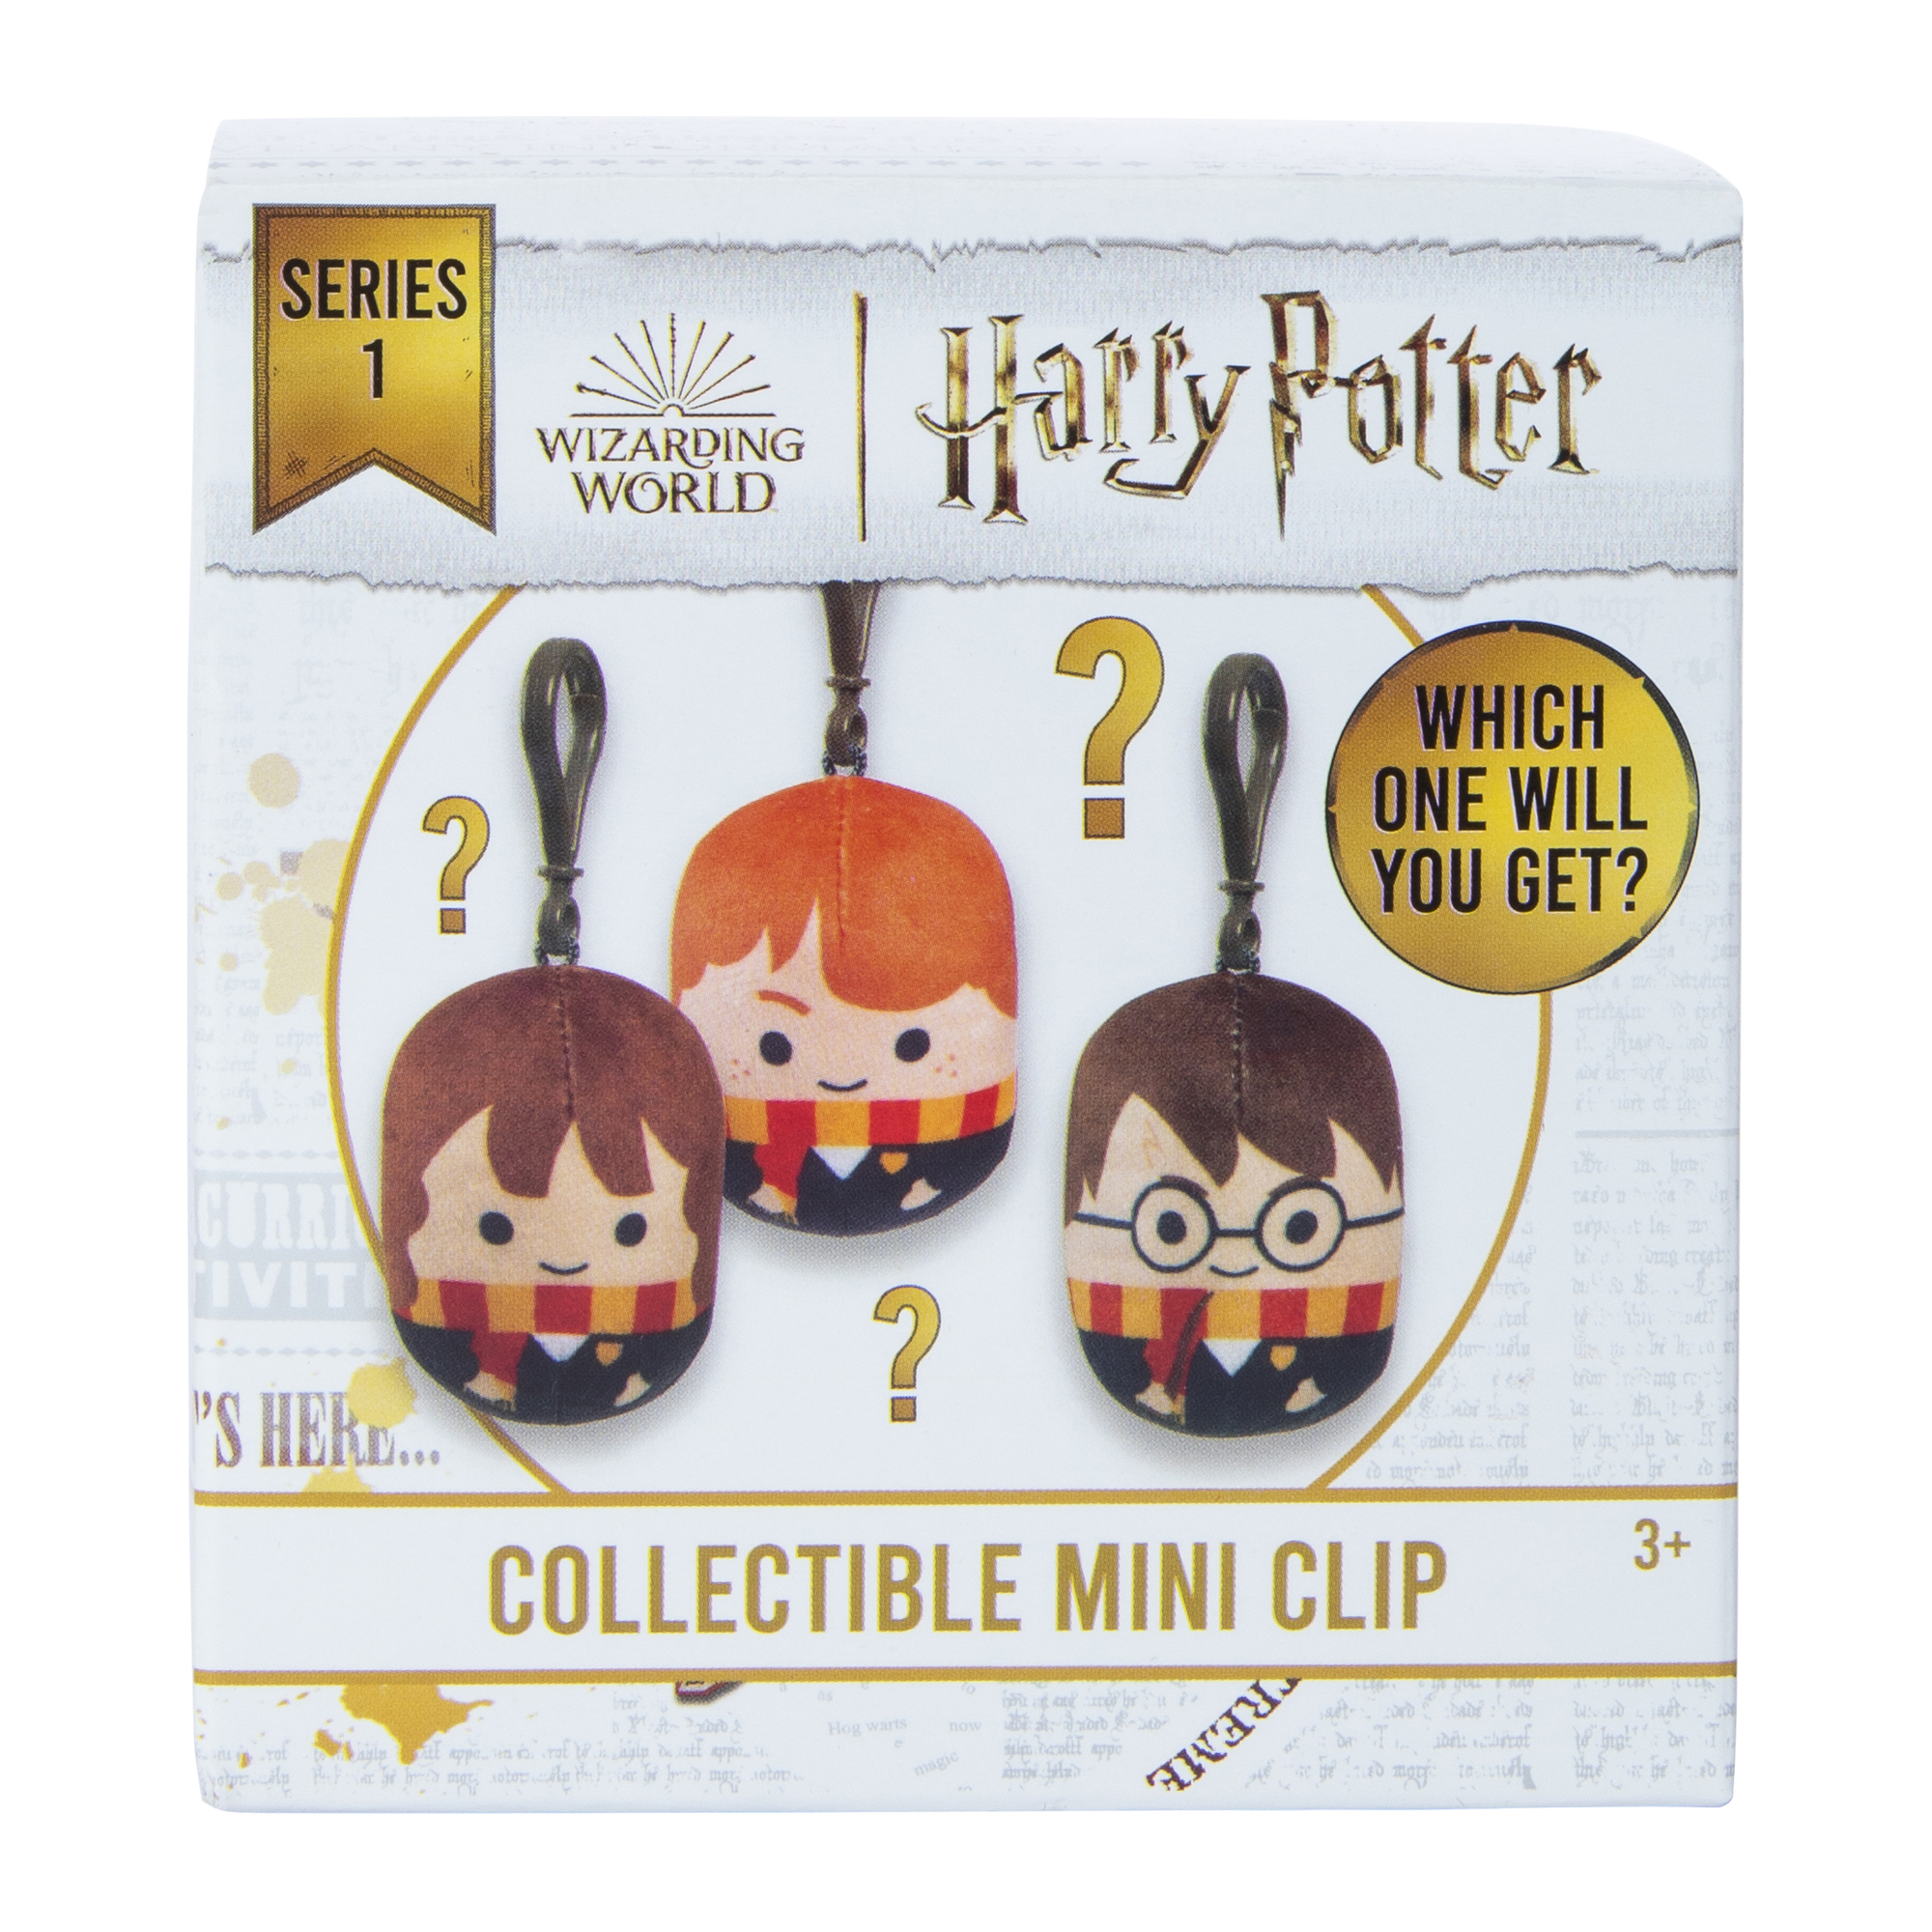 The #HarryPotter Diaper Bag collection is now unlocked. Grab your